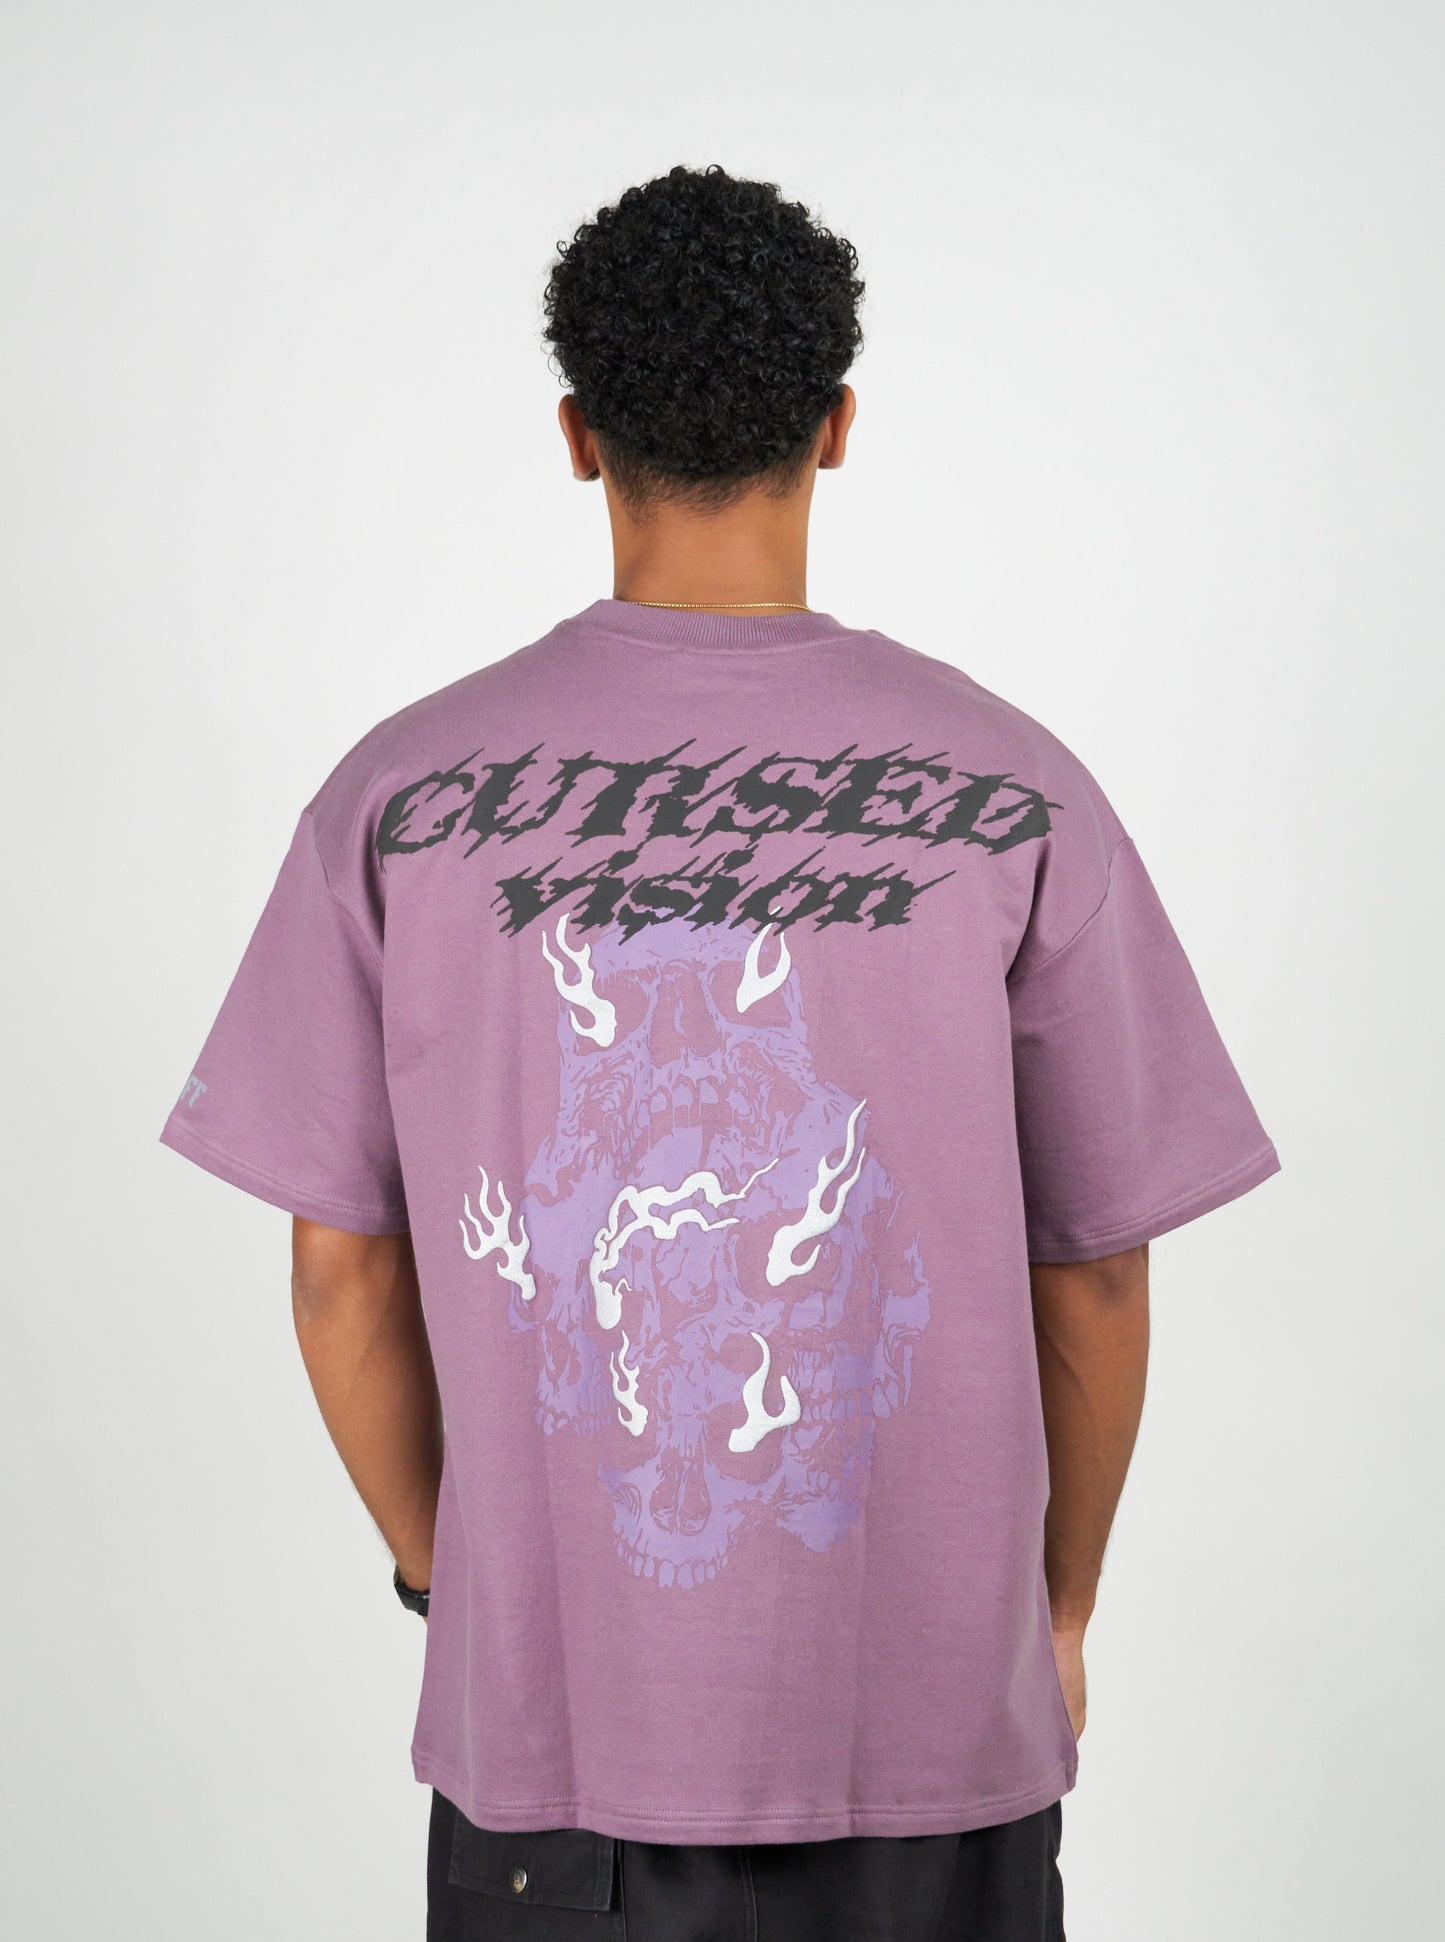 Cursed vision Tee (Oversized Tshirts) by Ripoff